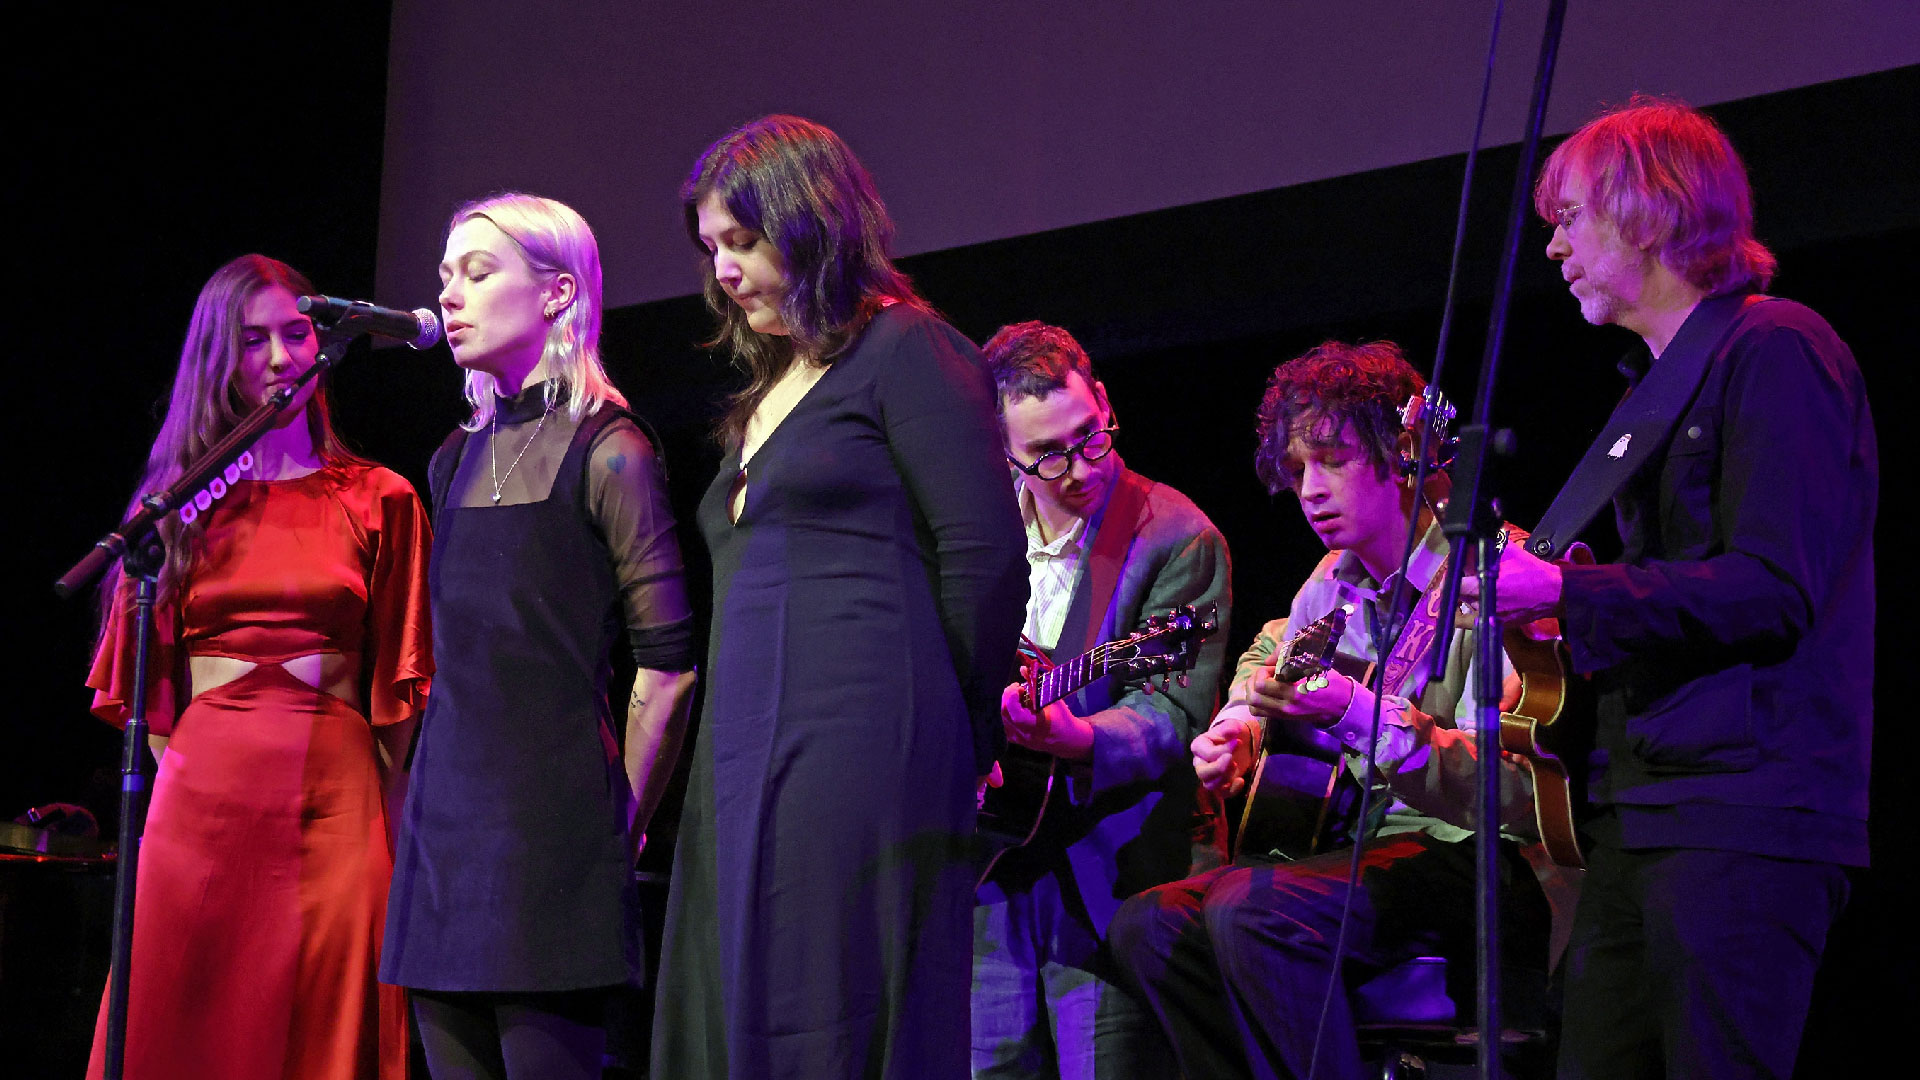 Weyes Blood, Phoebe Bridgers, Lucy Dacus, Jack Antonoff, Matt Healy, and Trey Anastasio perform at the 8th Annual Ally Coalition Talent Show at NYU Skirball Center on December 19, 2022 in New York City.